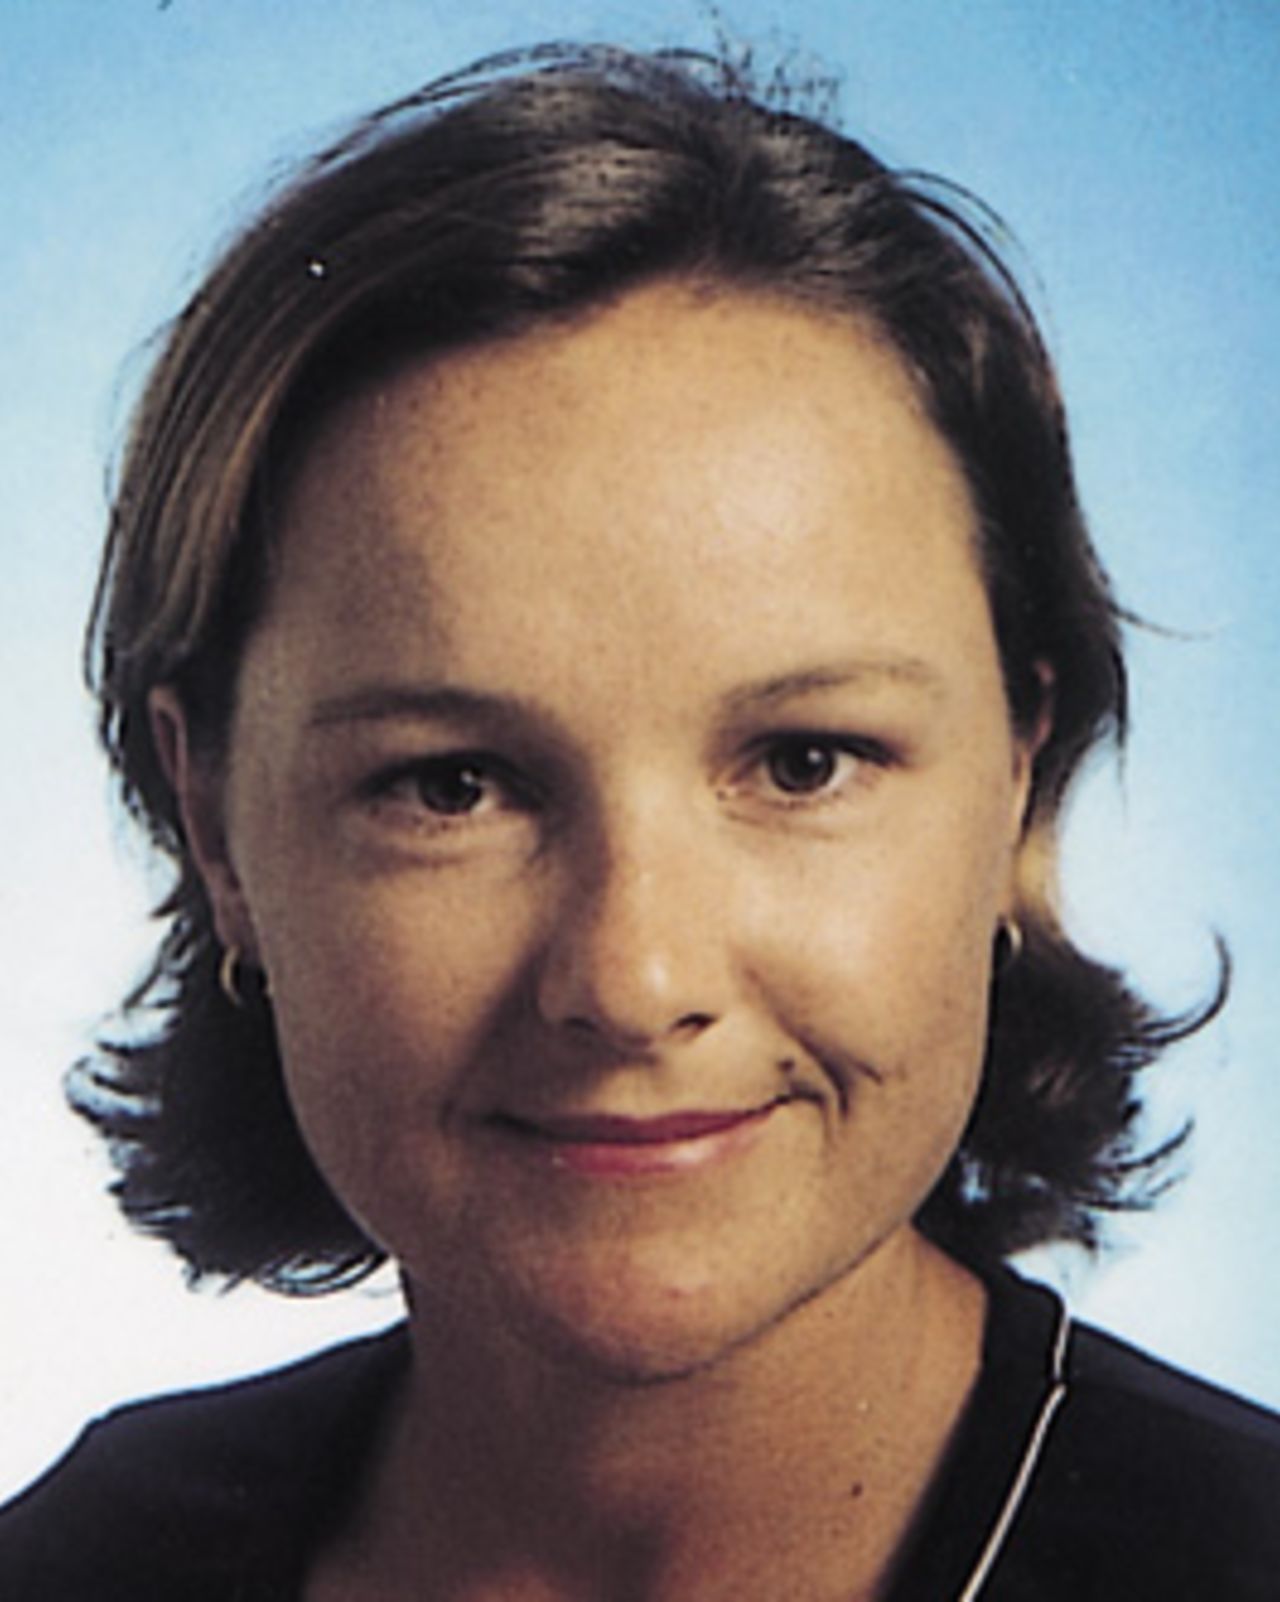 Portrait of Karen Young - Ireland player in the CricInfo Women's World Cup 2000